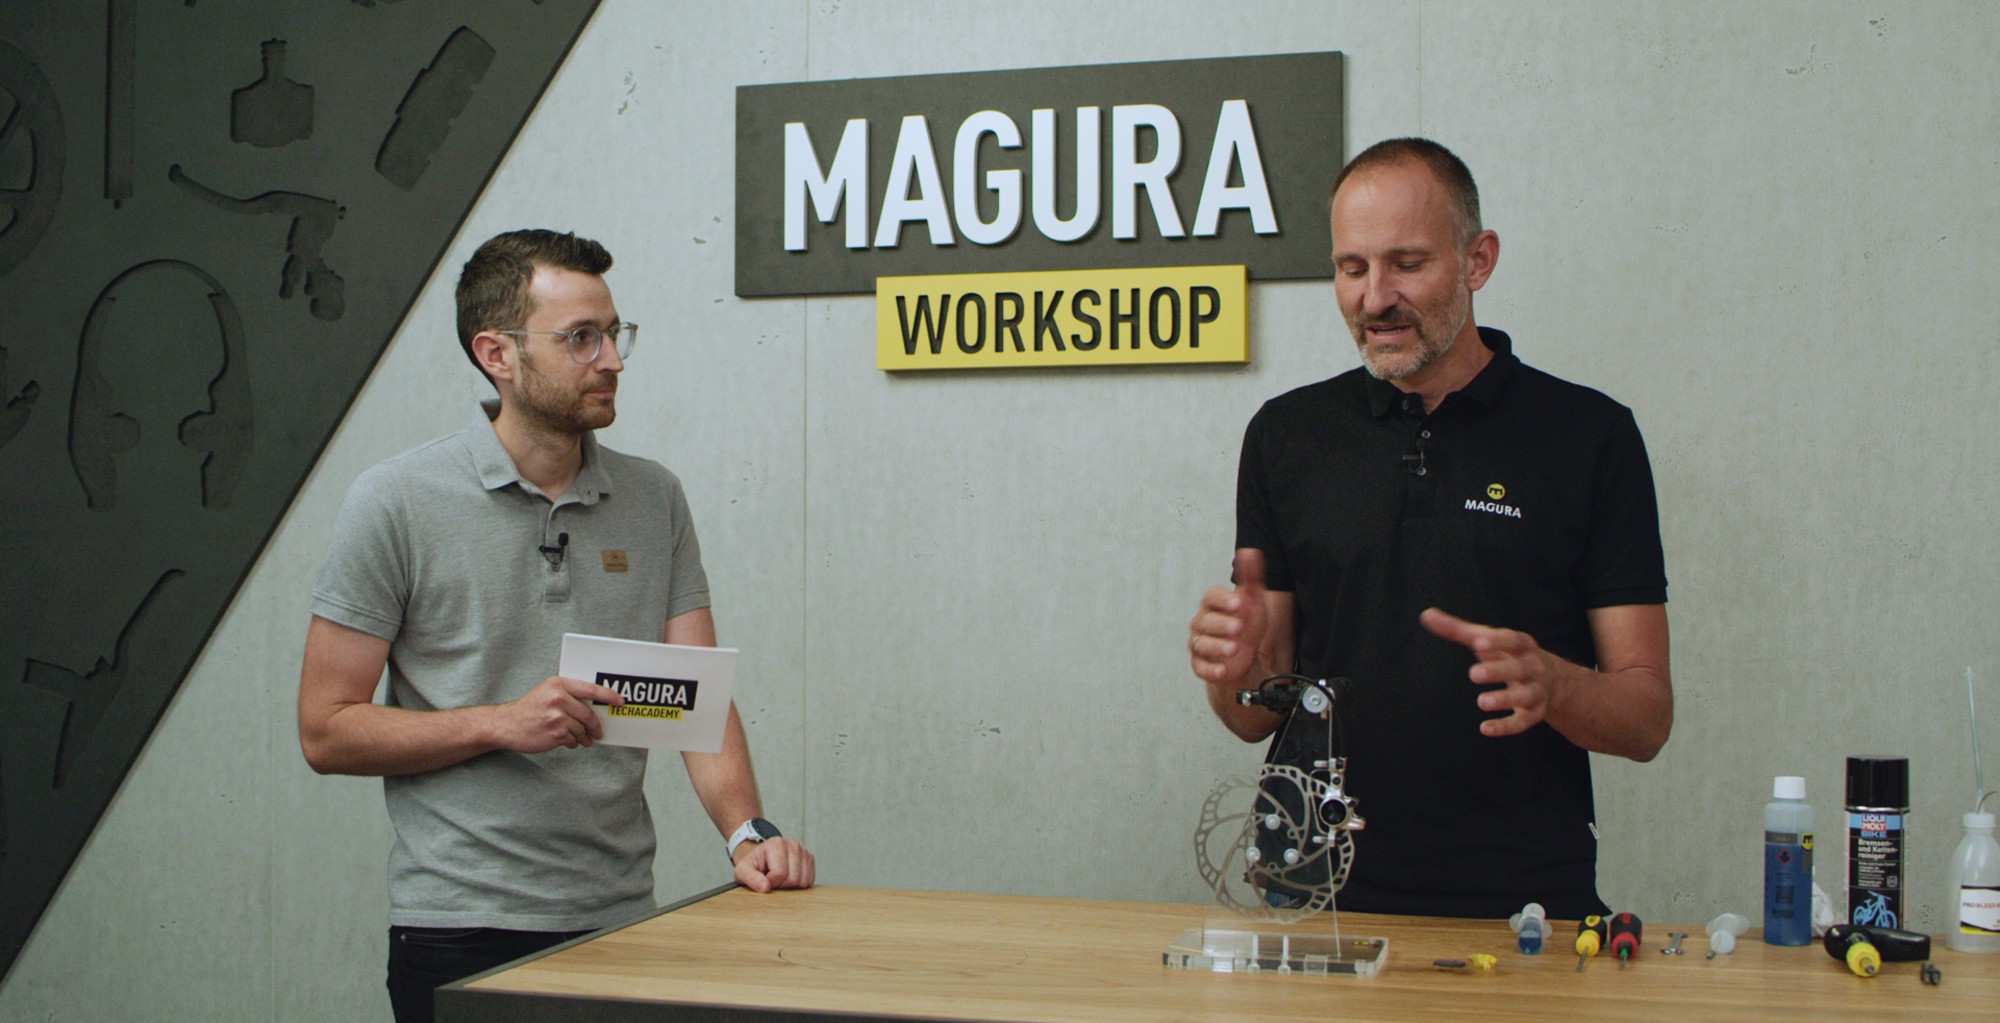 Magura on its digital learning platform TechAcademy – Features